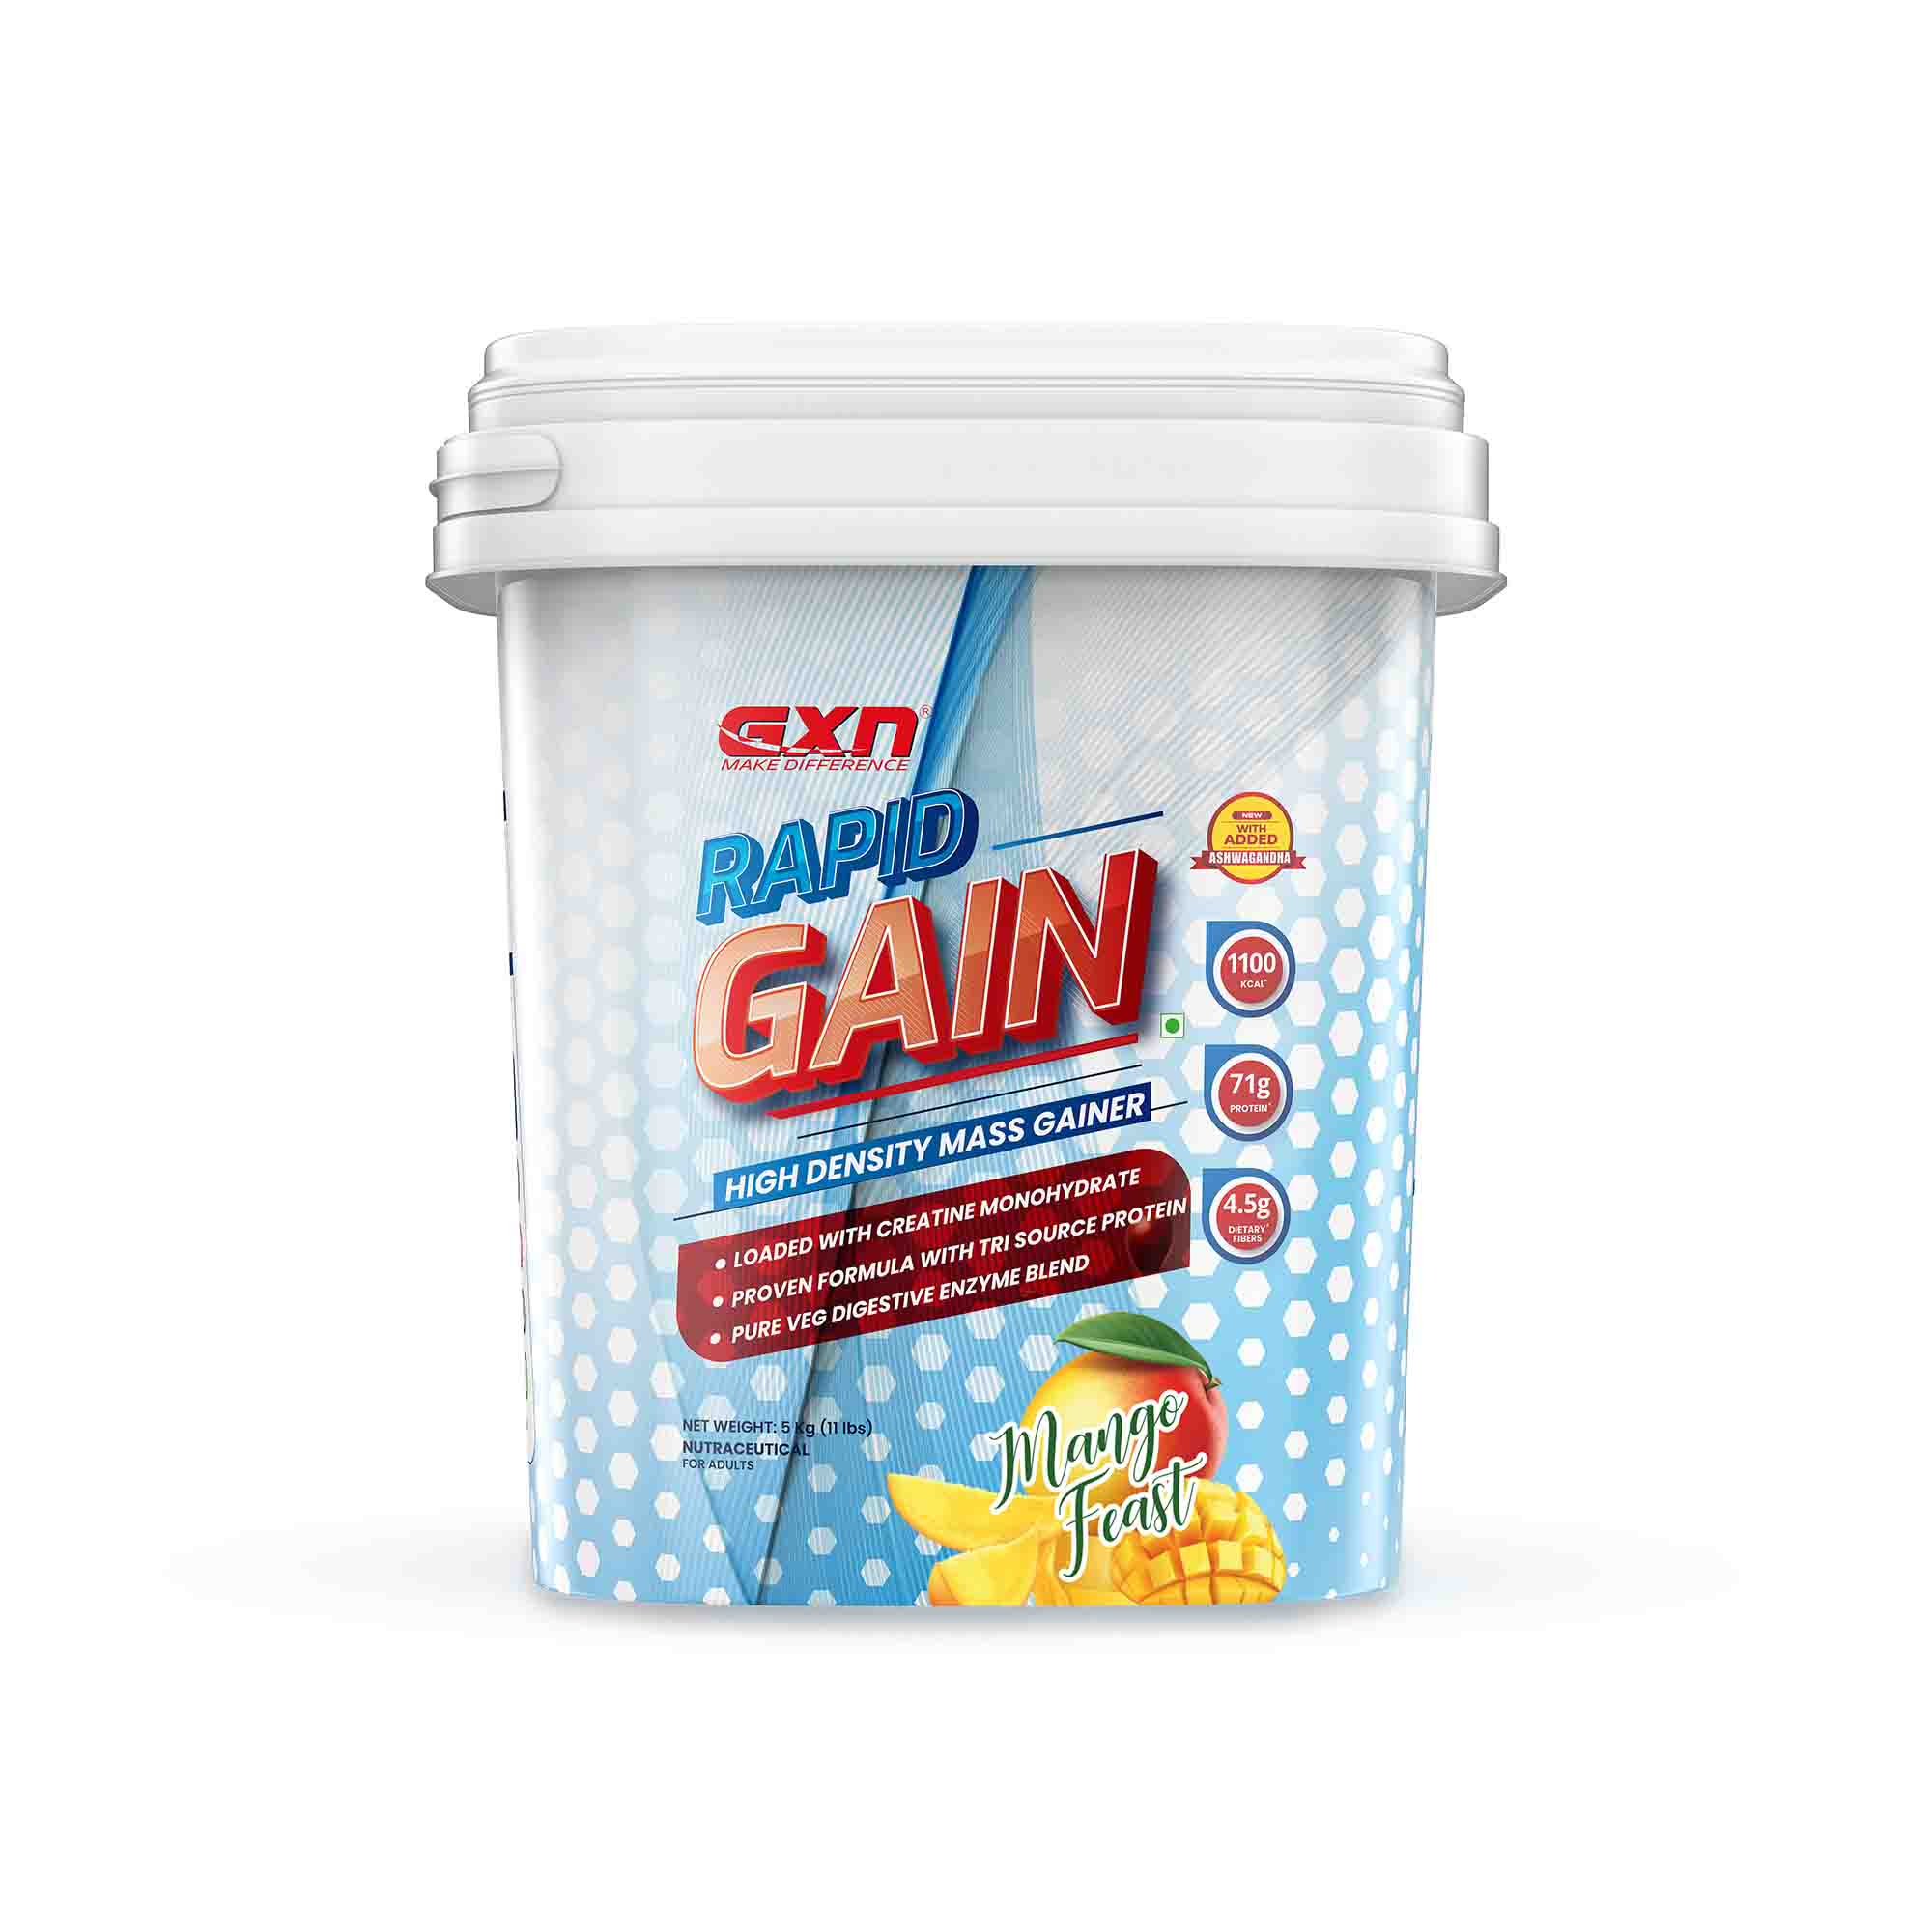 GXN Gainer Powerpacked Nutrition for Superior Muscle Growt - Haryana - Gurgaon ID1522237 2